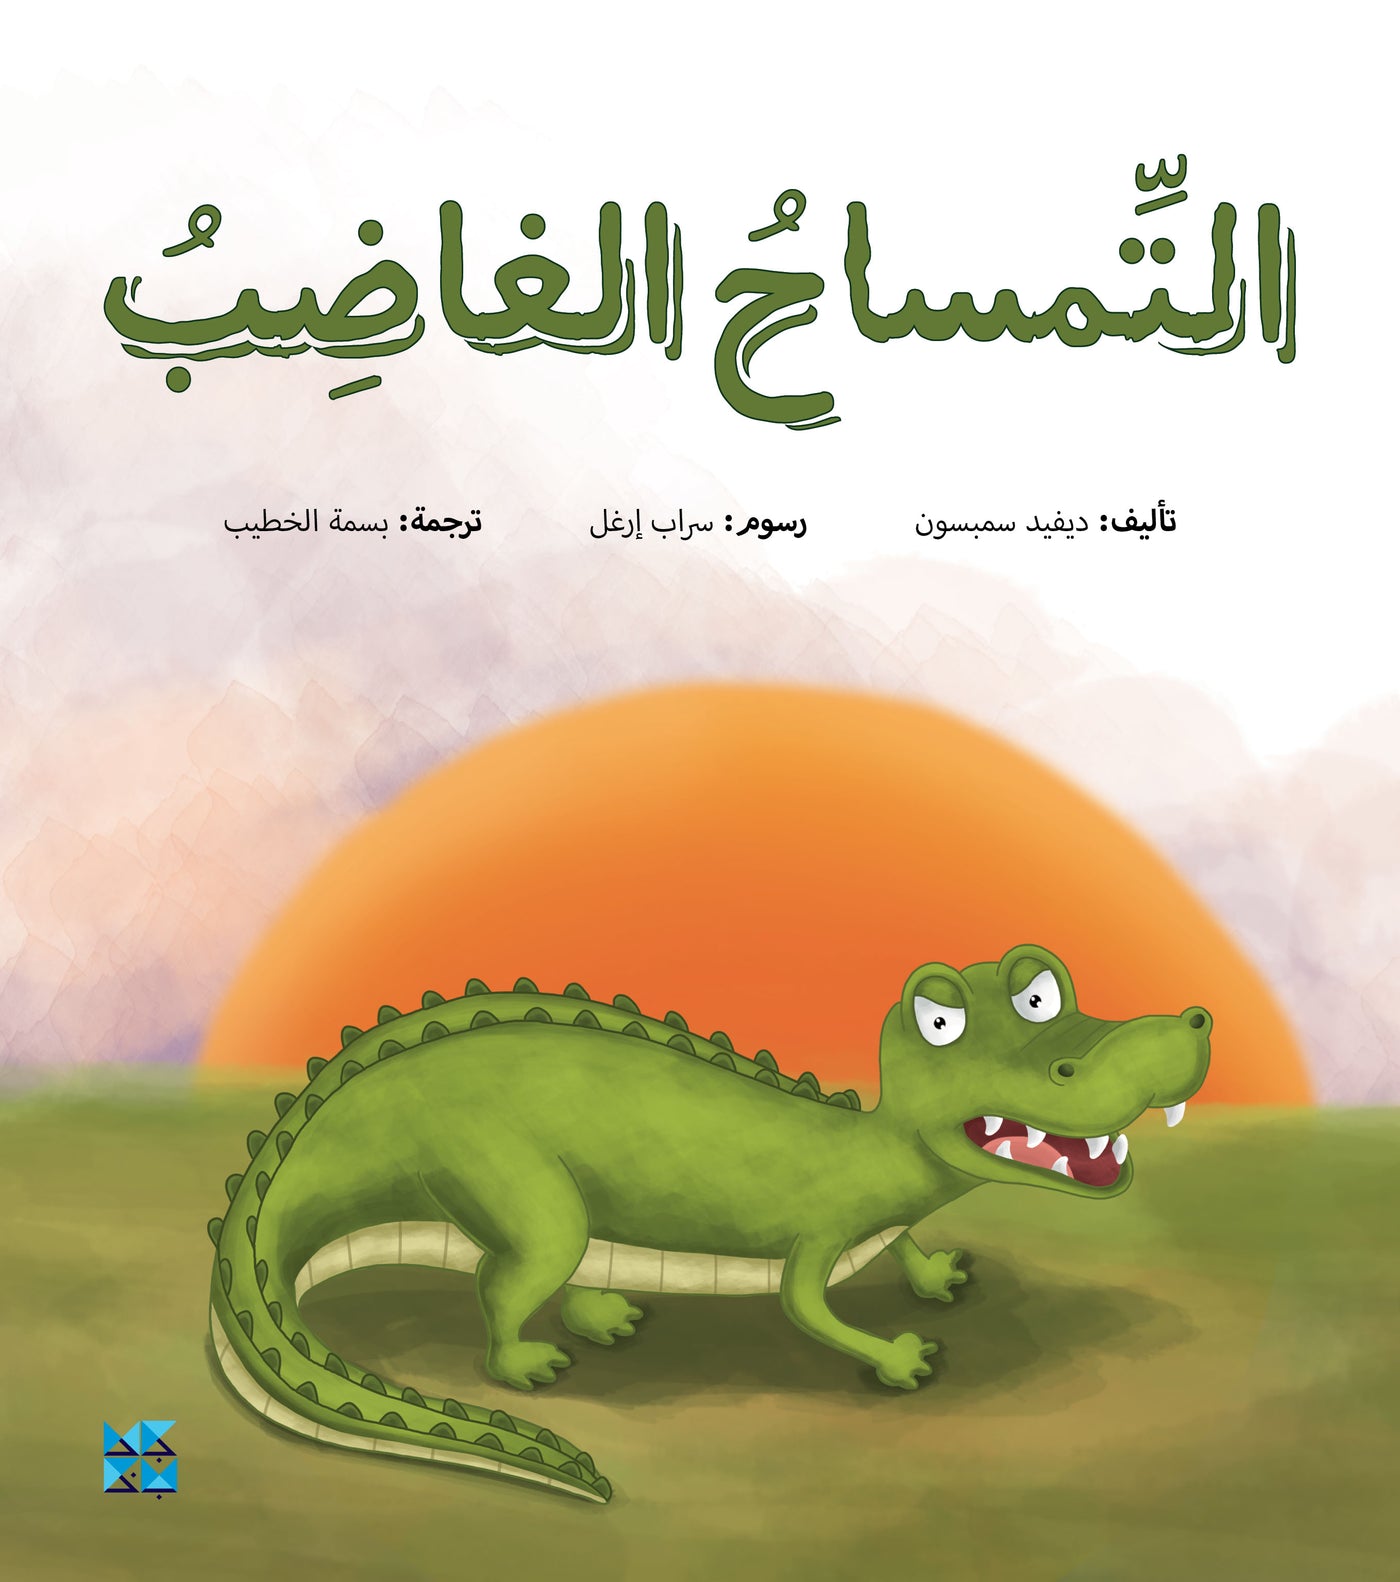 The Angry Crocodile - Book Series Cover